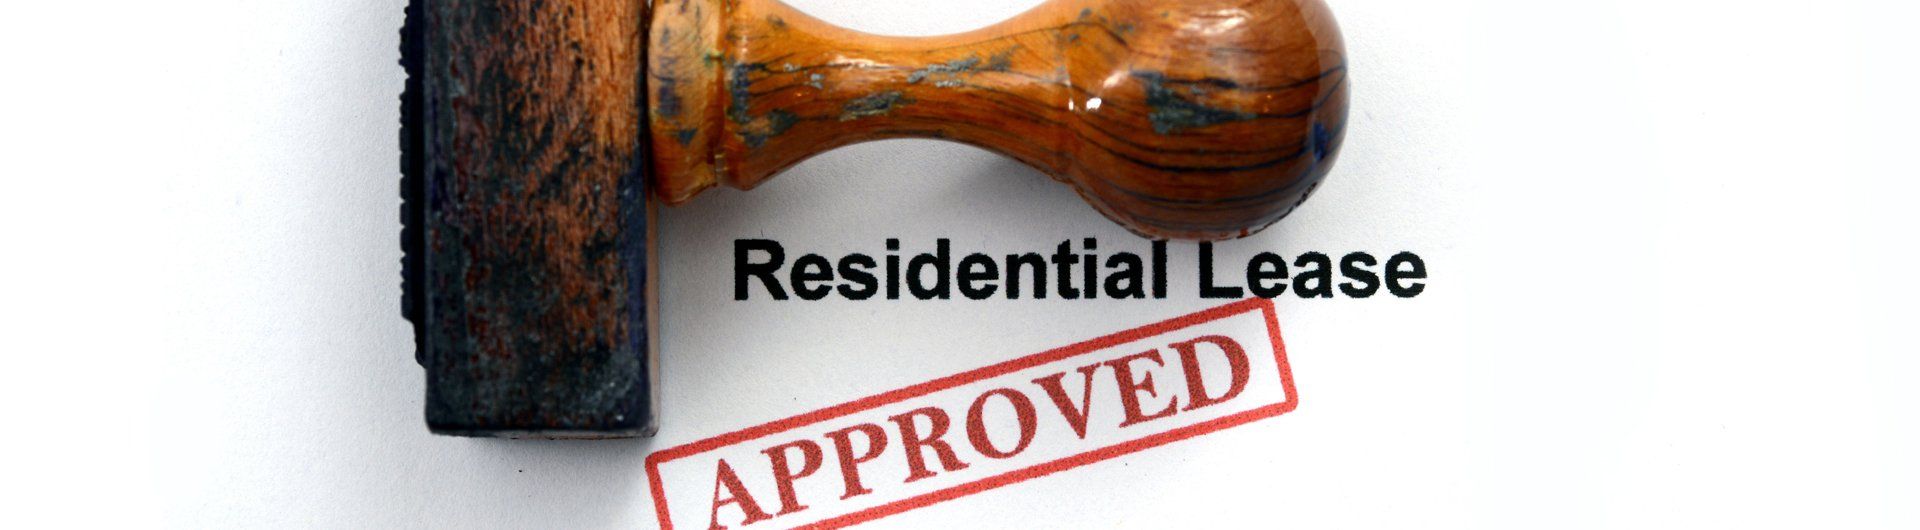 Approved residential lease